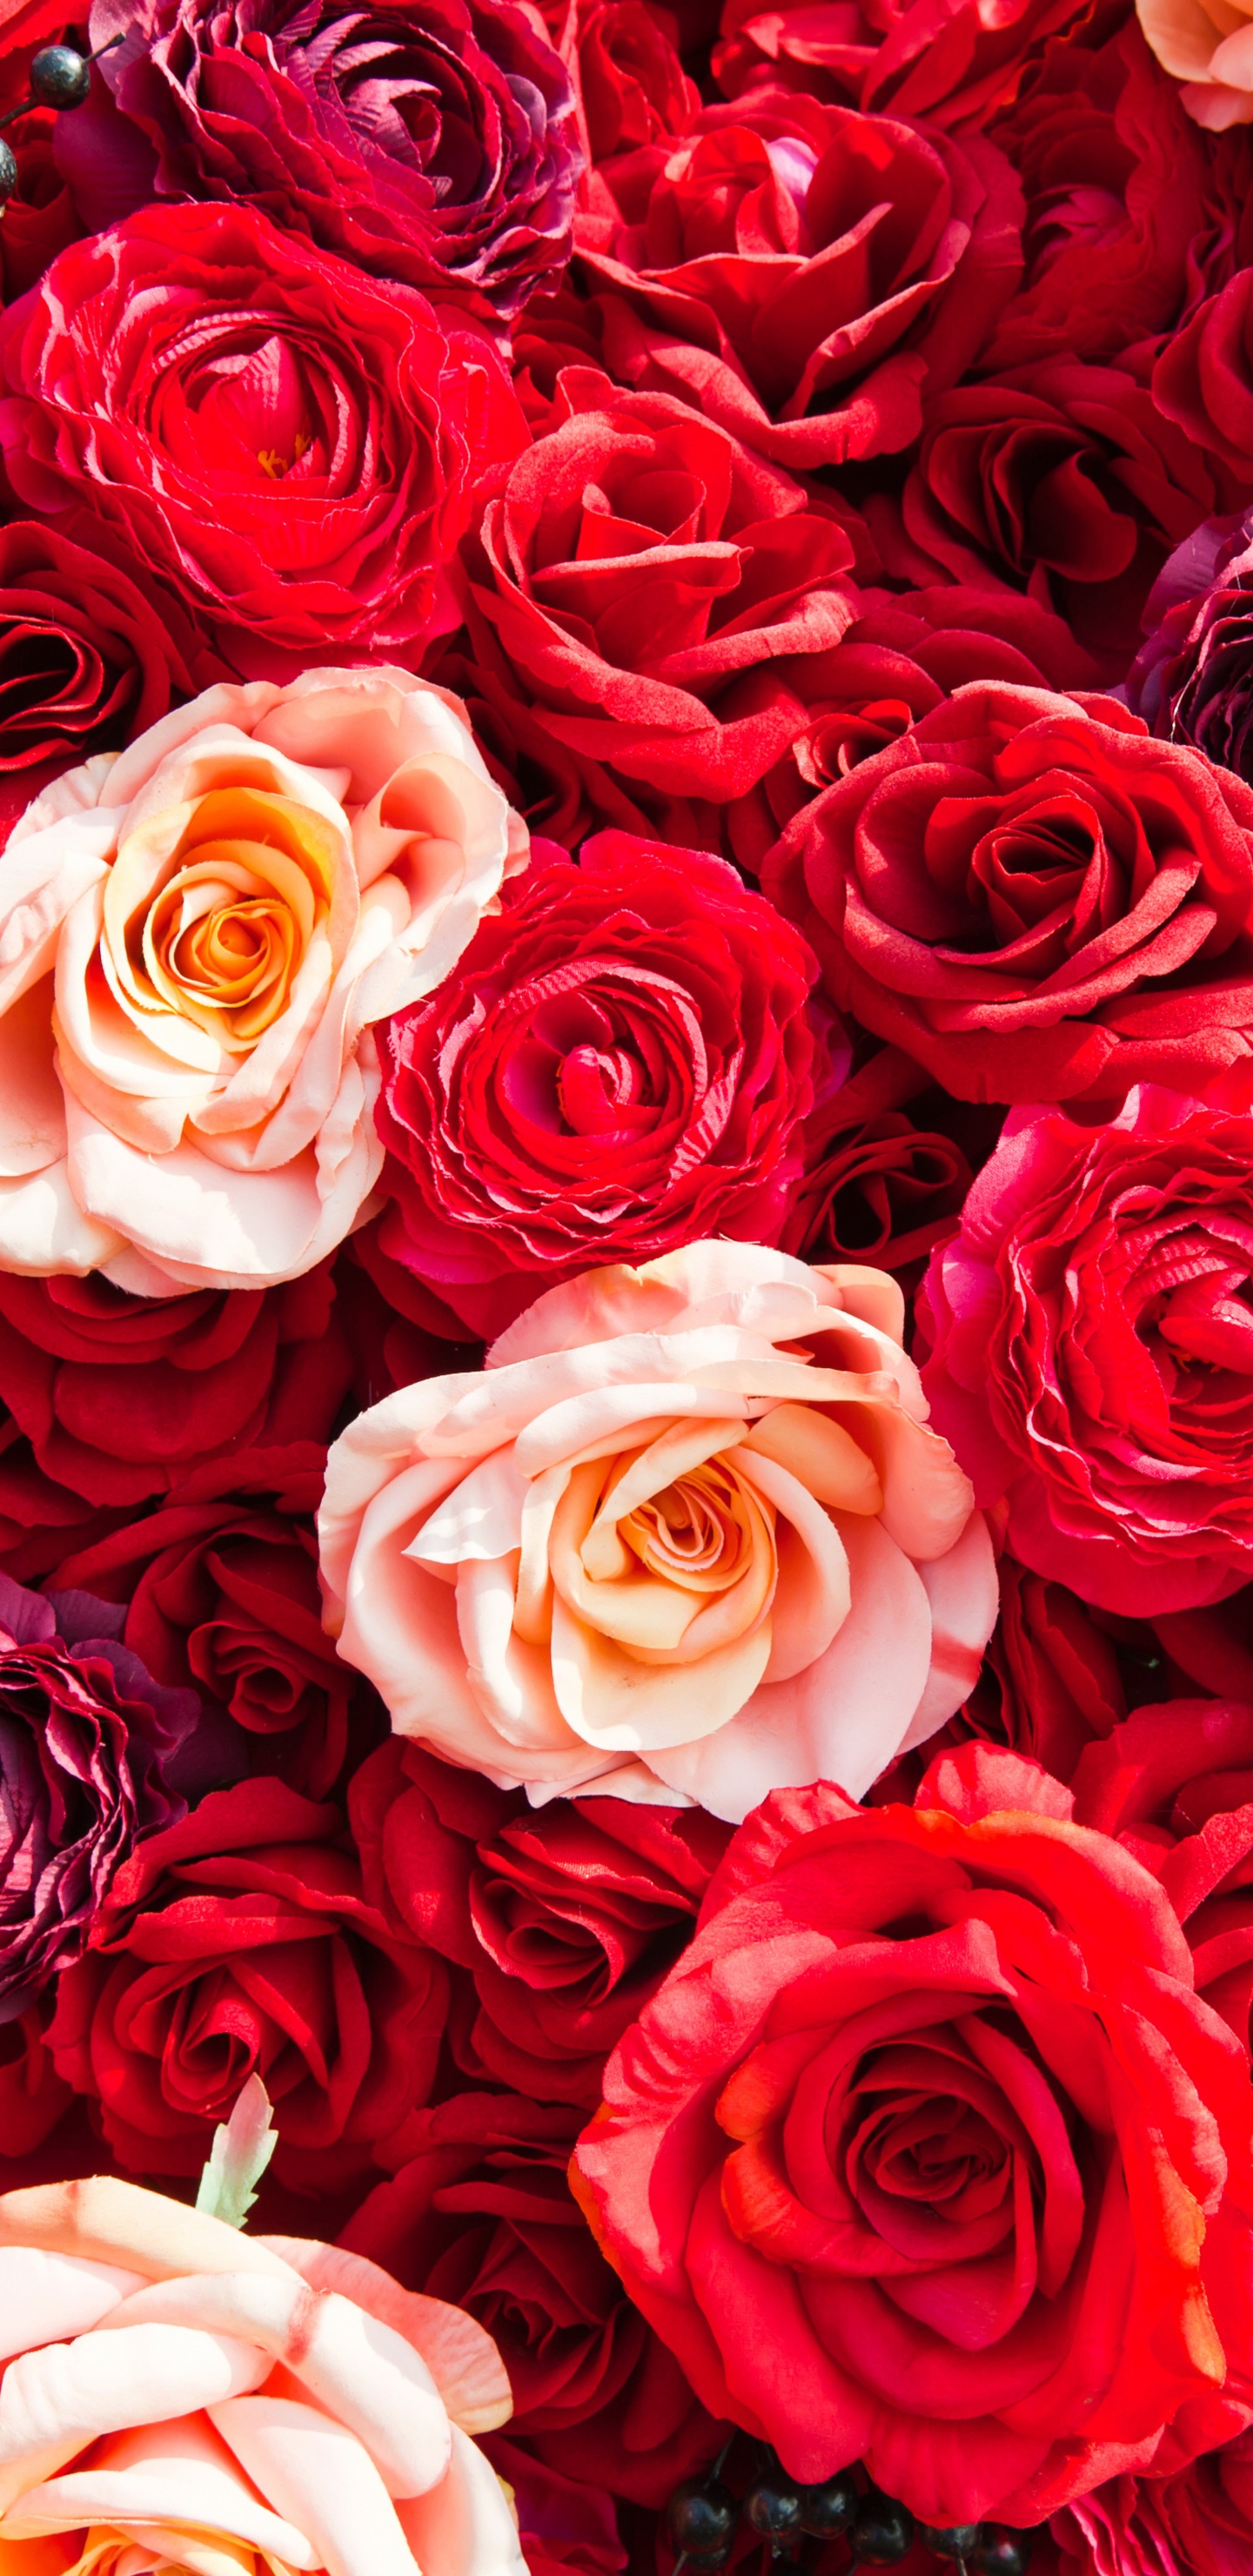 Red and White Roses Bouquet. Wallpaper in 1440x2960 Resolution